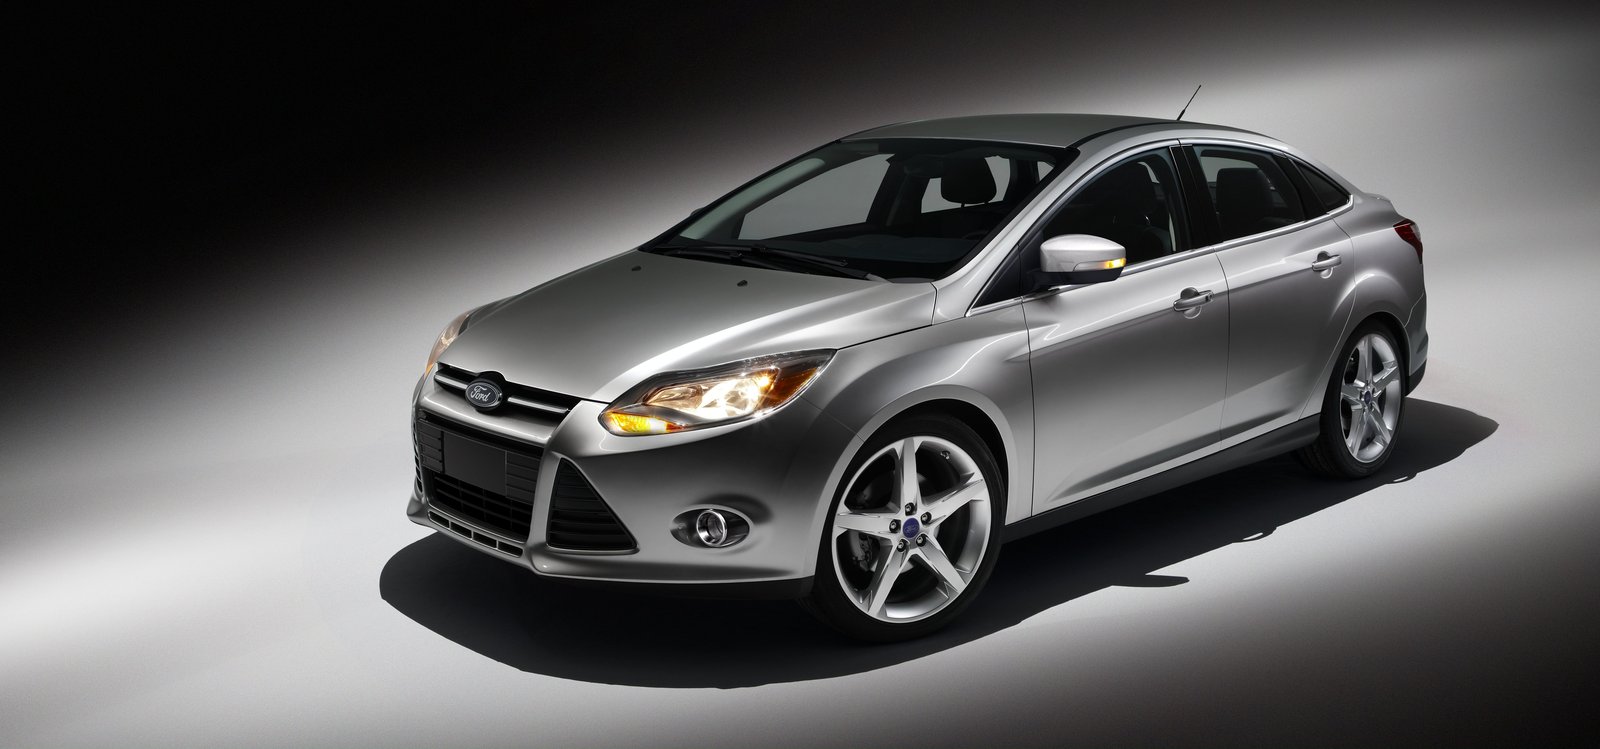 How Much Do Tires Cost for a Ford Focus 